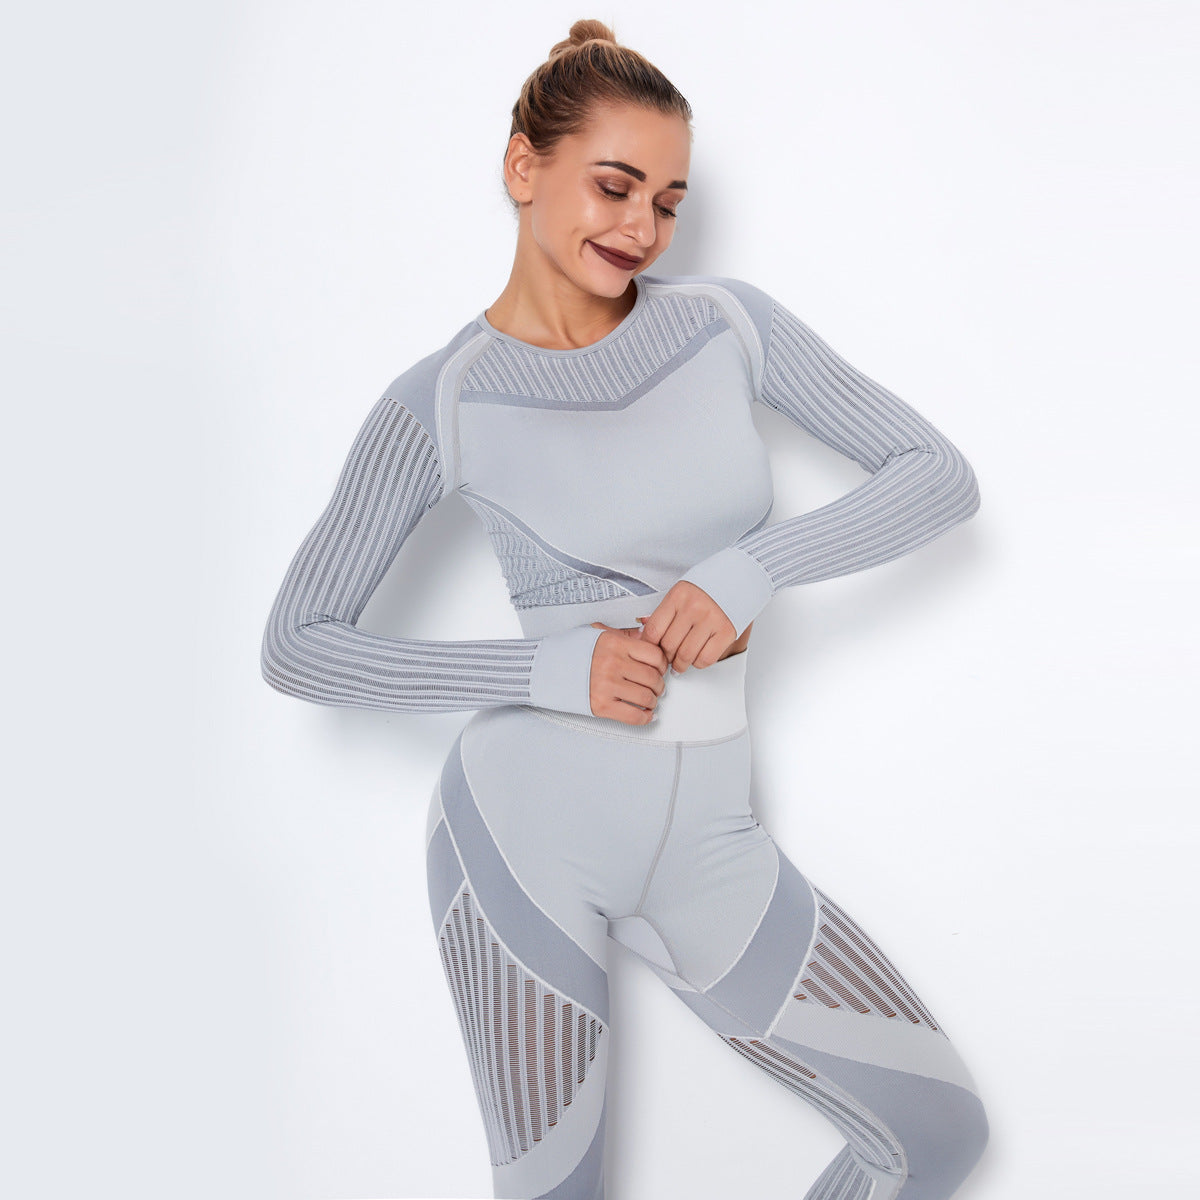 New Sports Skinny Hollow out Plastic Top Quick-Drying Running Yoga Clothes Seamless Workout Long Sleeve